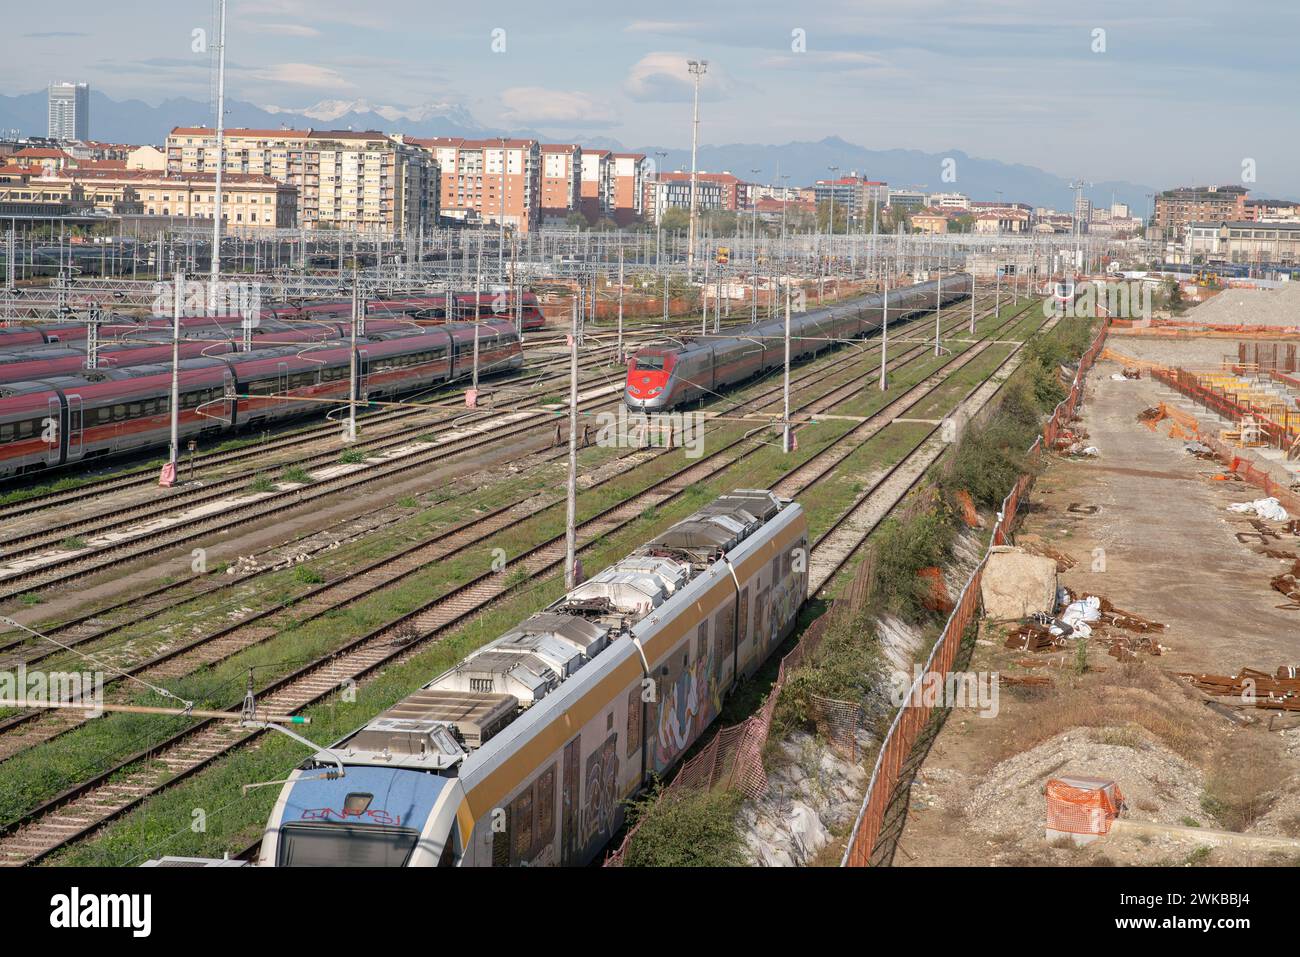 multiple railway lines, trains move from all cities to new destinations allowing passengers to connect all metropolises thanks to an efficient railway Stock Photo